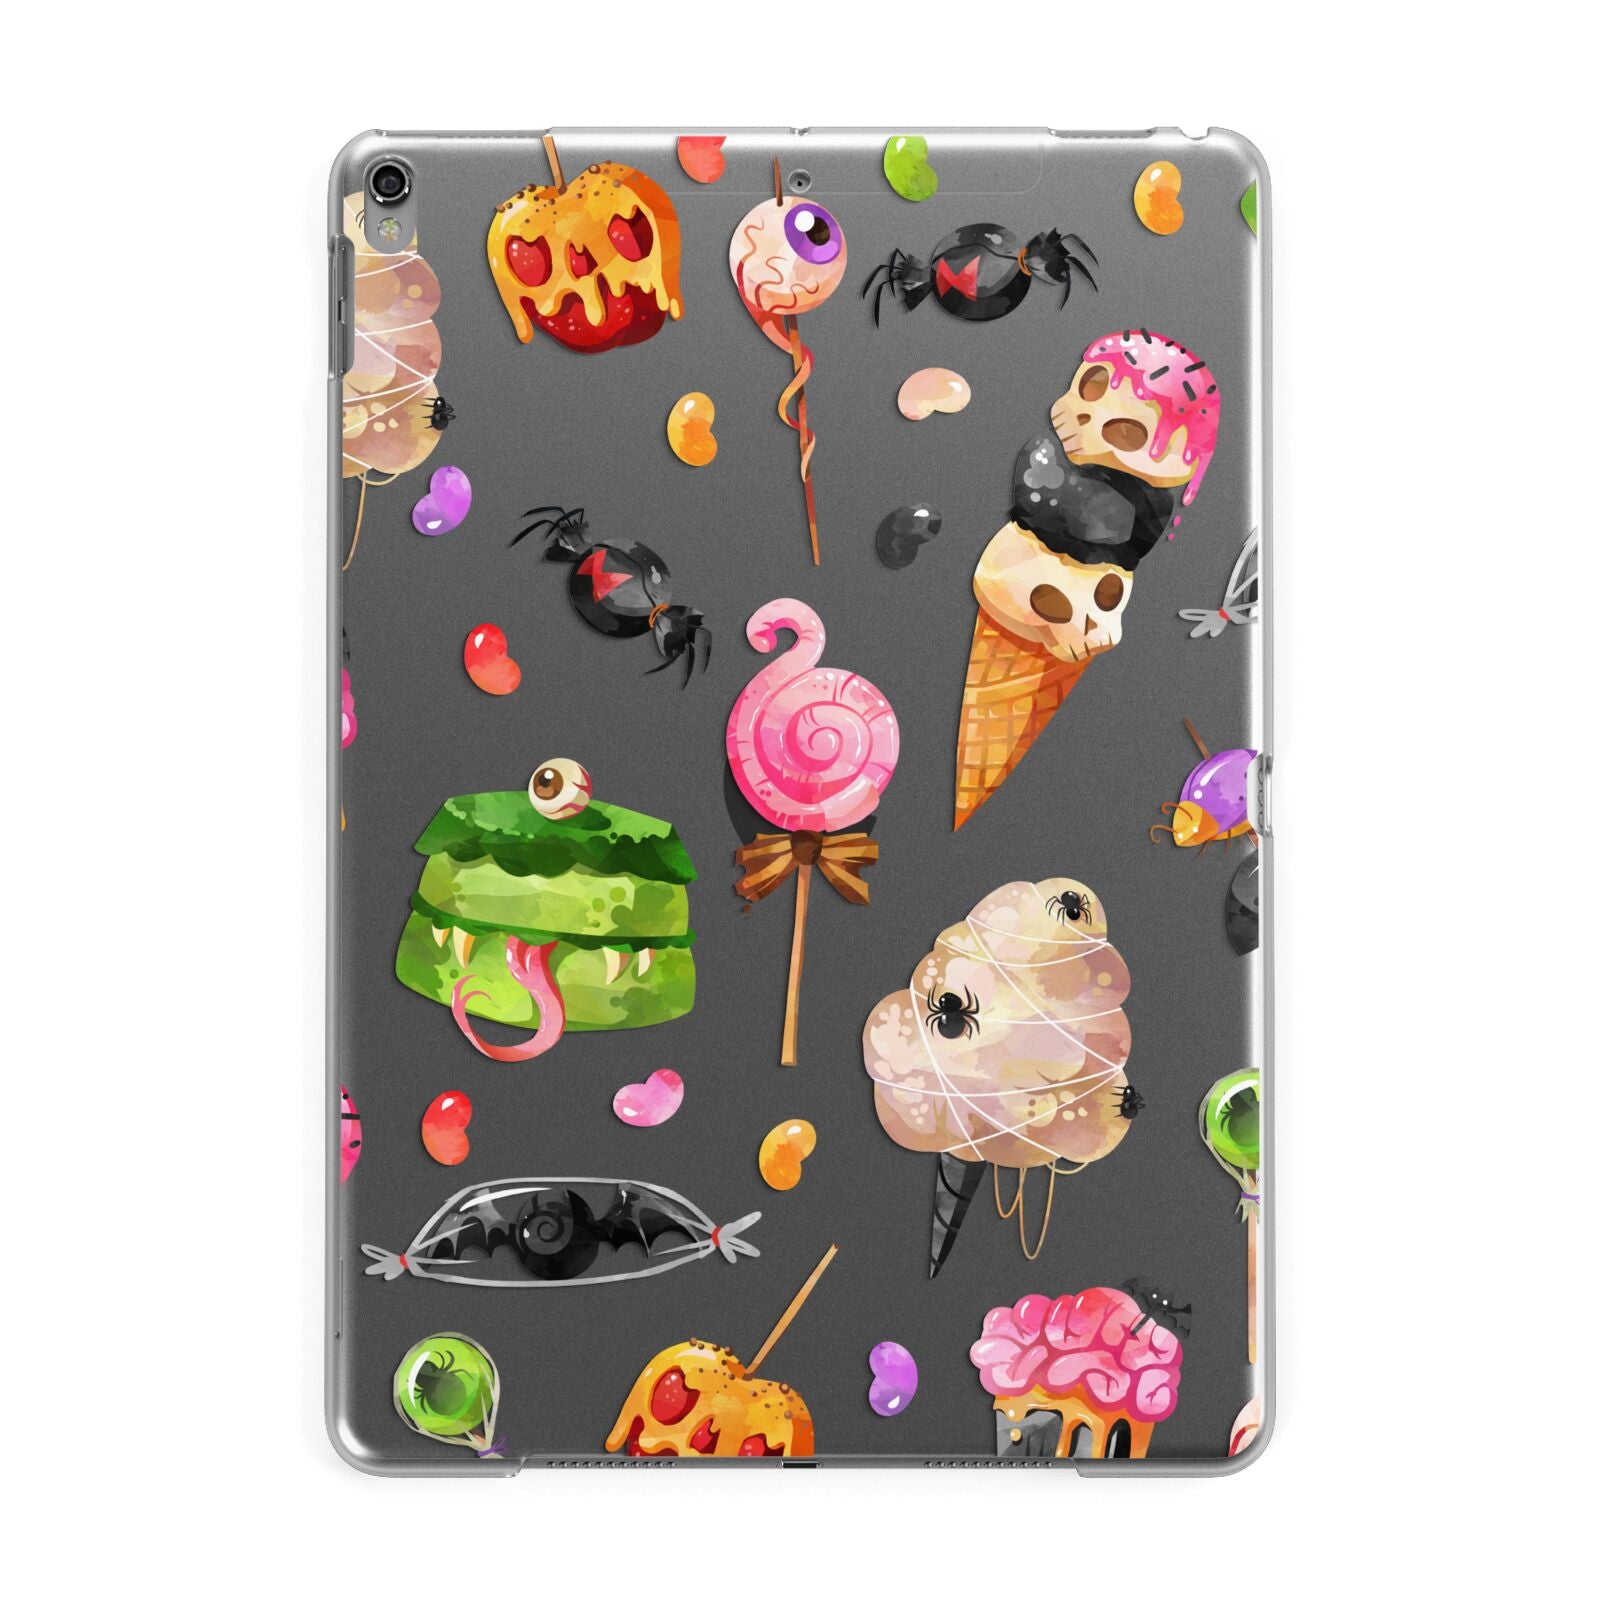 Halloween Cakes and Candy Apple iPad Grey Case